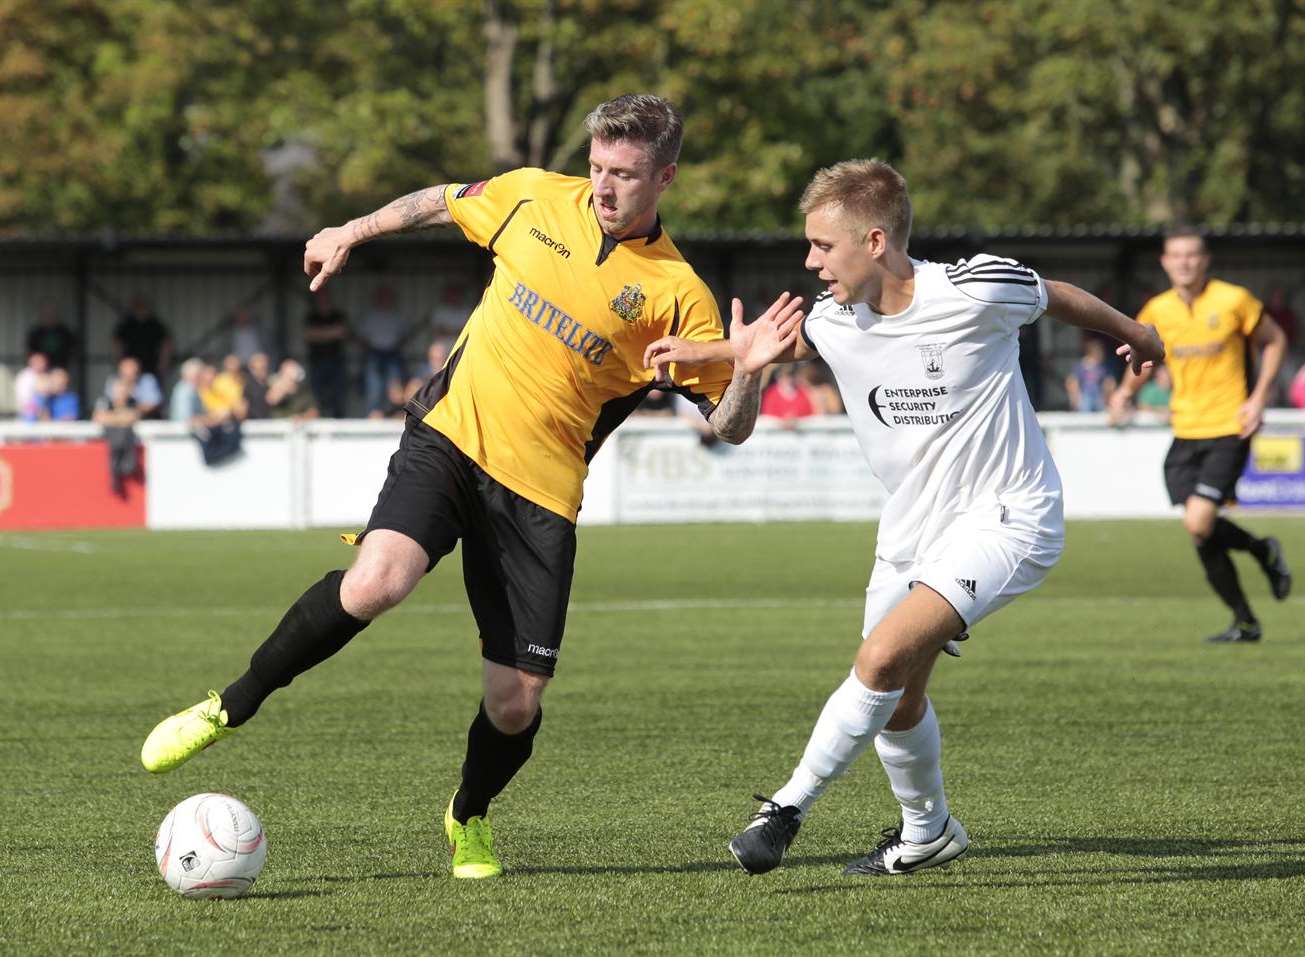 Dean Pooley playing for Maidstone against Littlehampton in the FA Cup Picture: Martin Apps